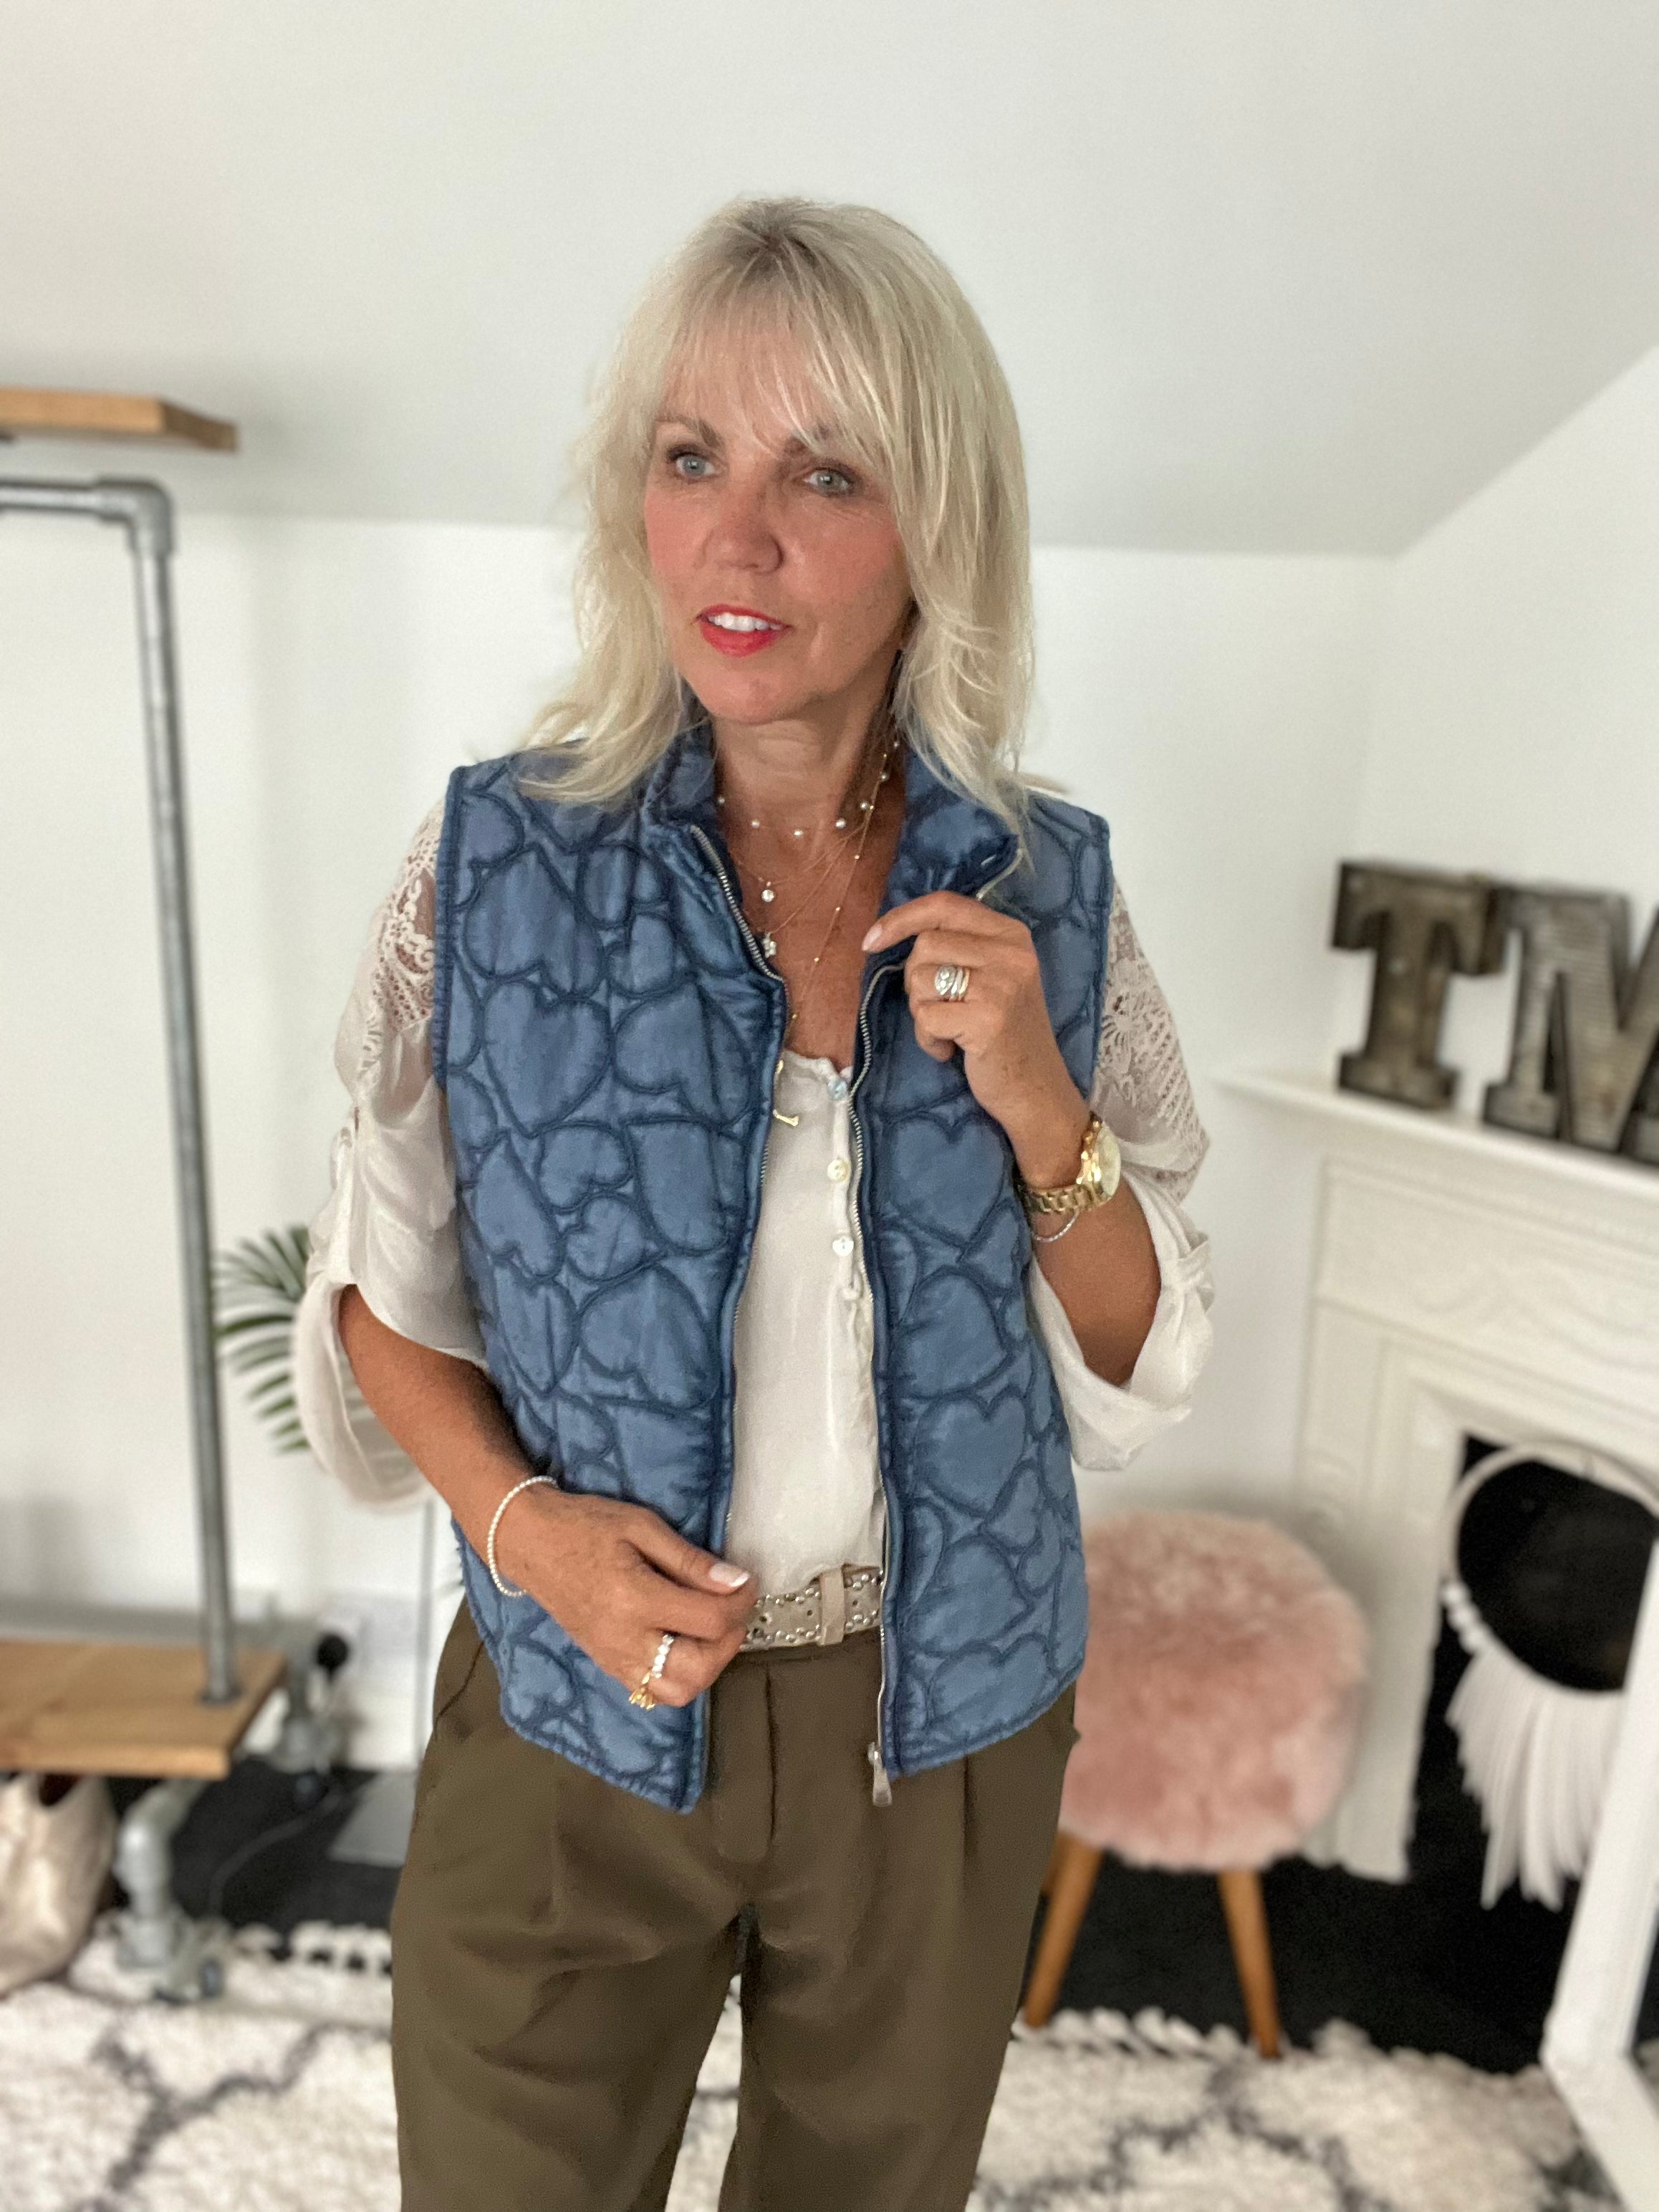 Quilted Gilet with Denim Hearts